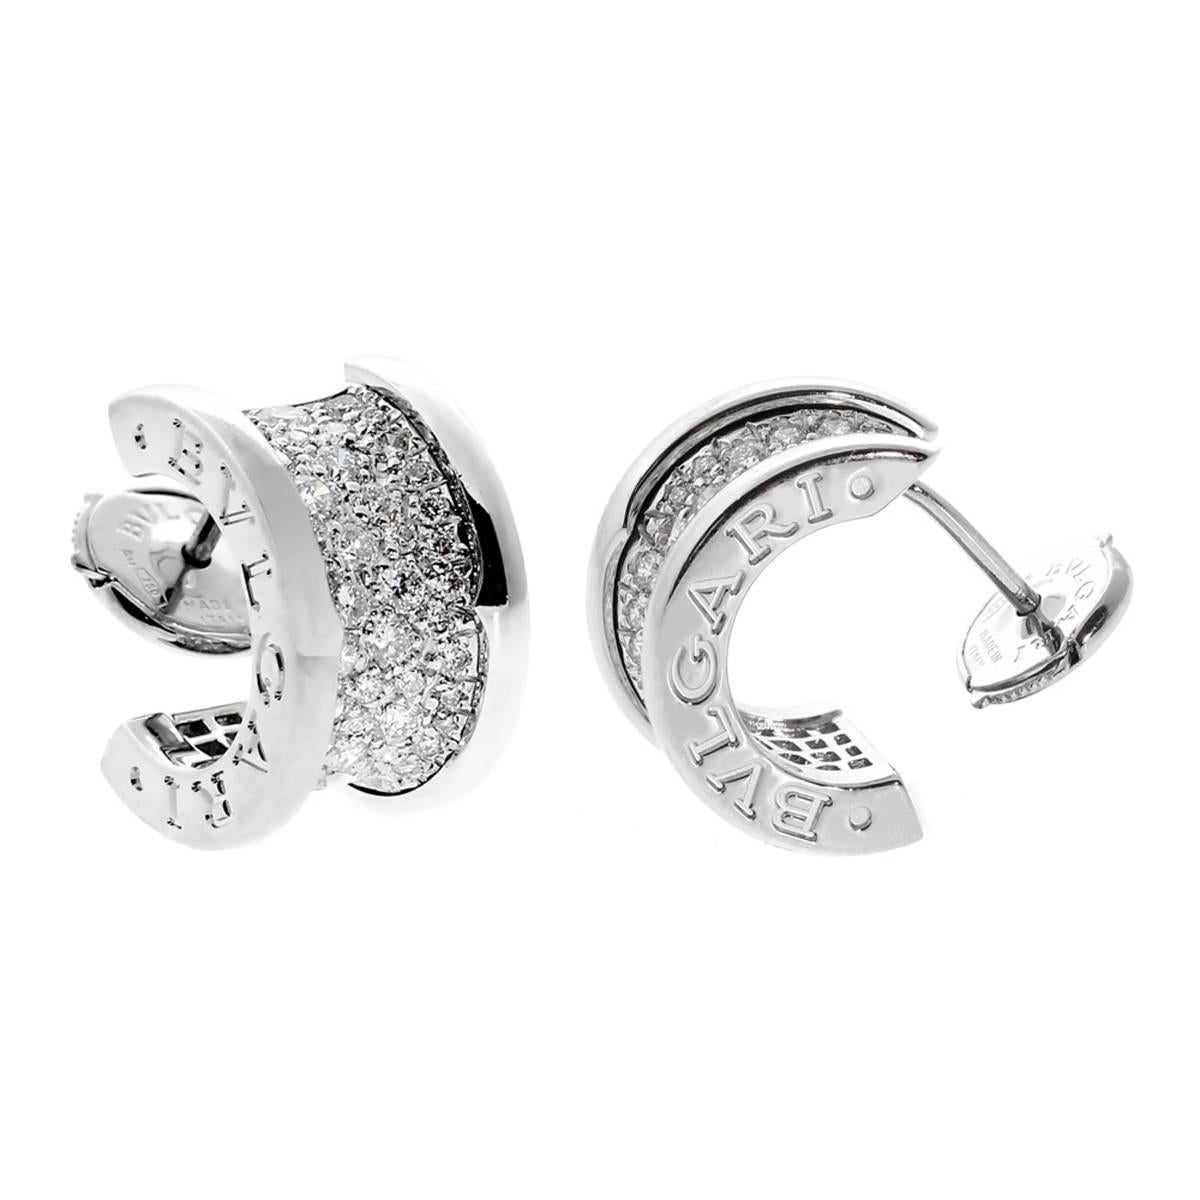 A magnificent pair of authentic Bulgari B.Zero1 earrings set with the finest Bulgari round brilliant cut diamonds in shimmering 18k white gold. The earrings measure .35